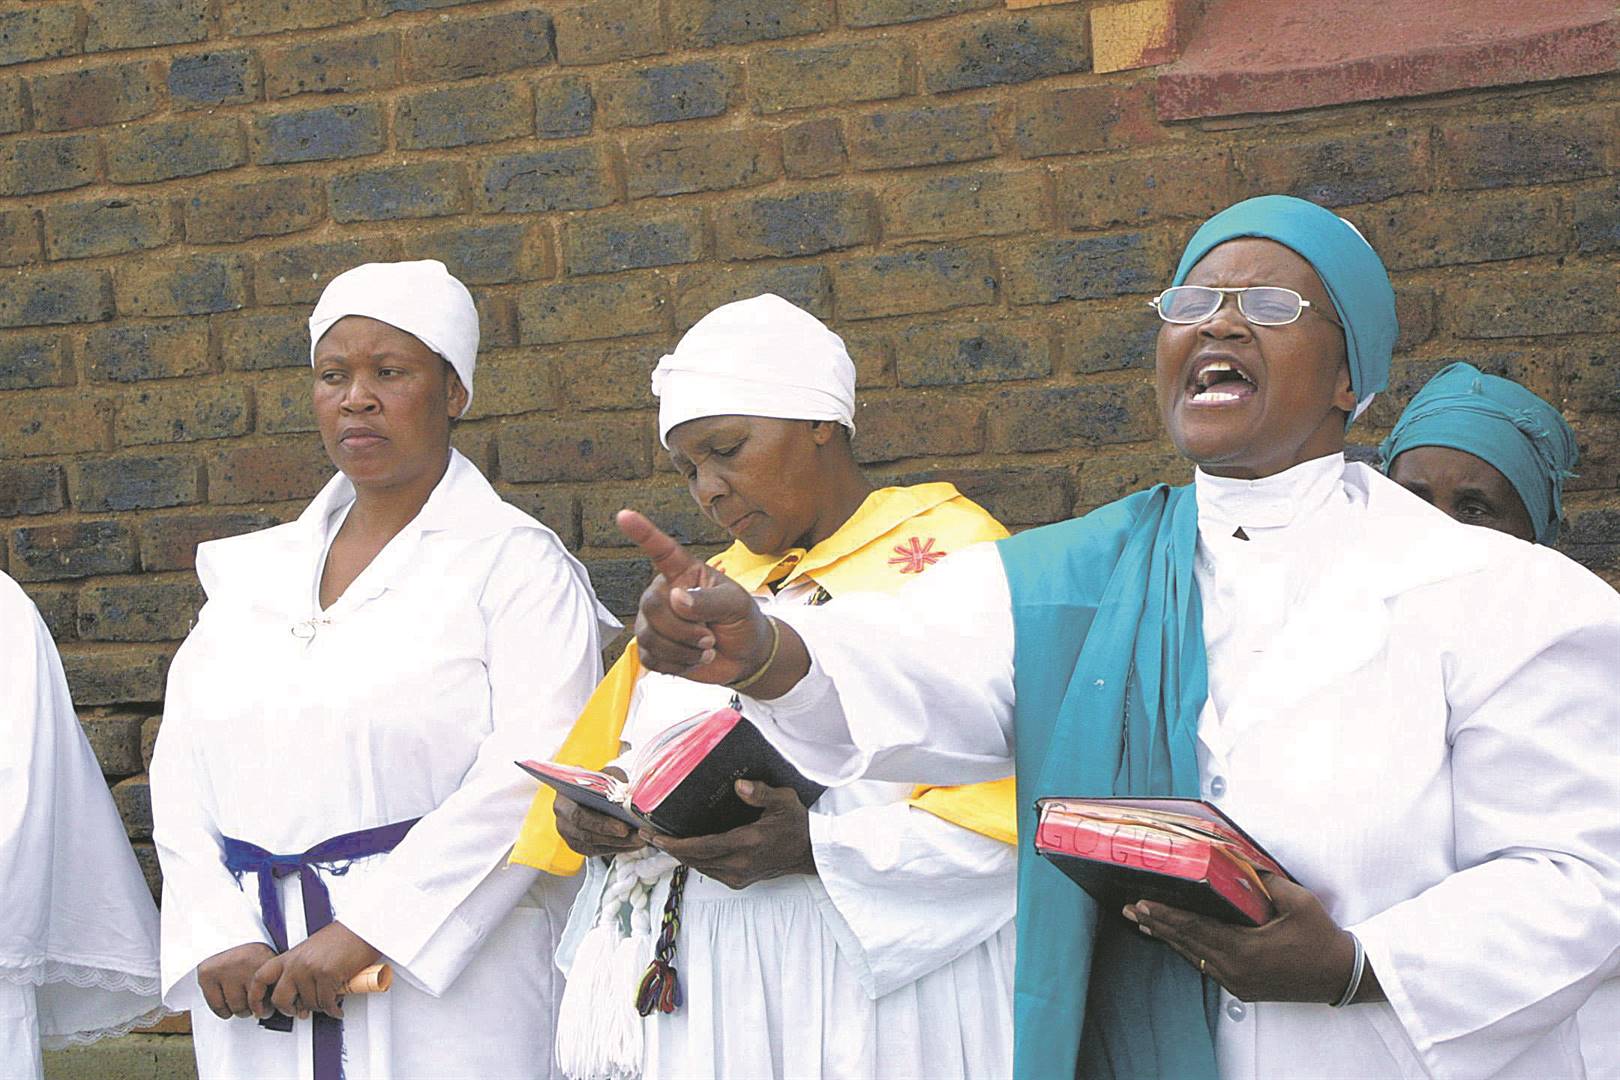 Members of the Apostolic Church of Zion at their church service Photo: Bomba Chauke